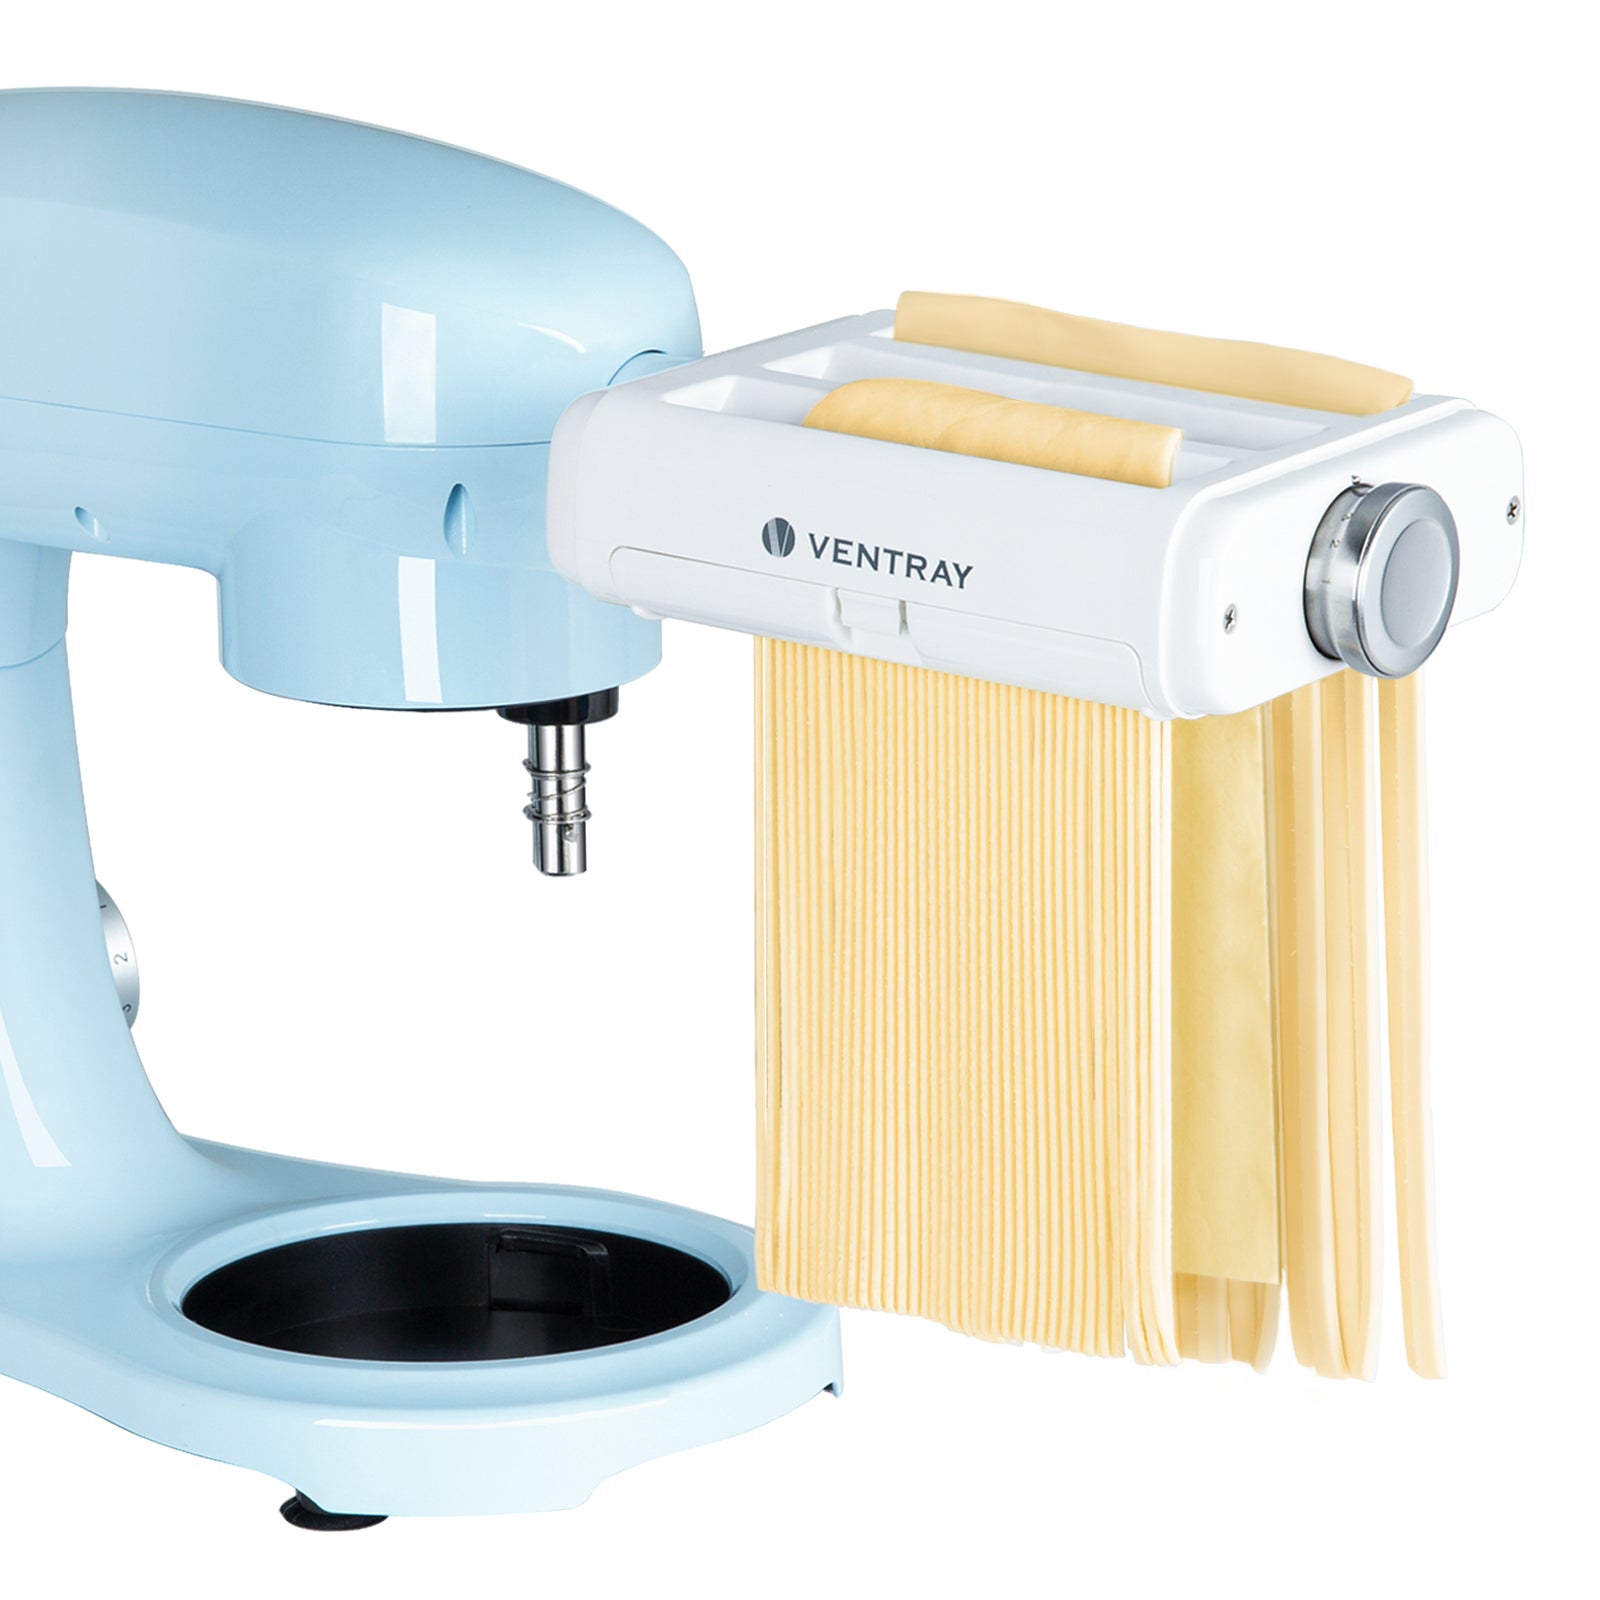 Kenome AKOW21717 Pasta Maker Attachment, 3 in 1 Set for KitchenAid Stand Mixers